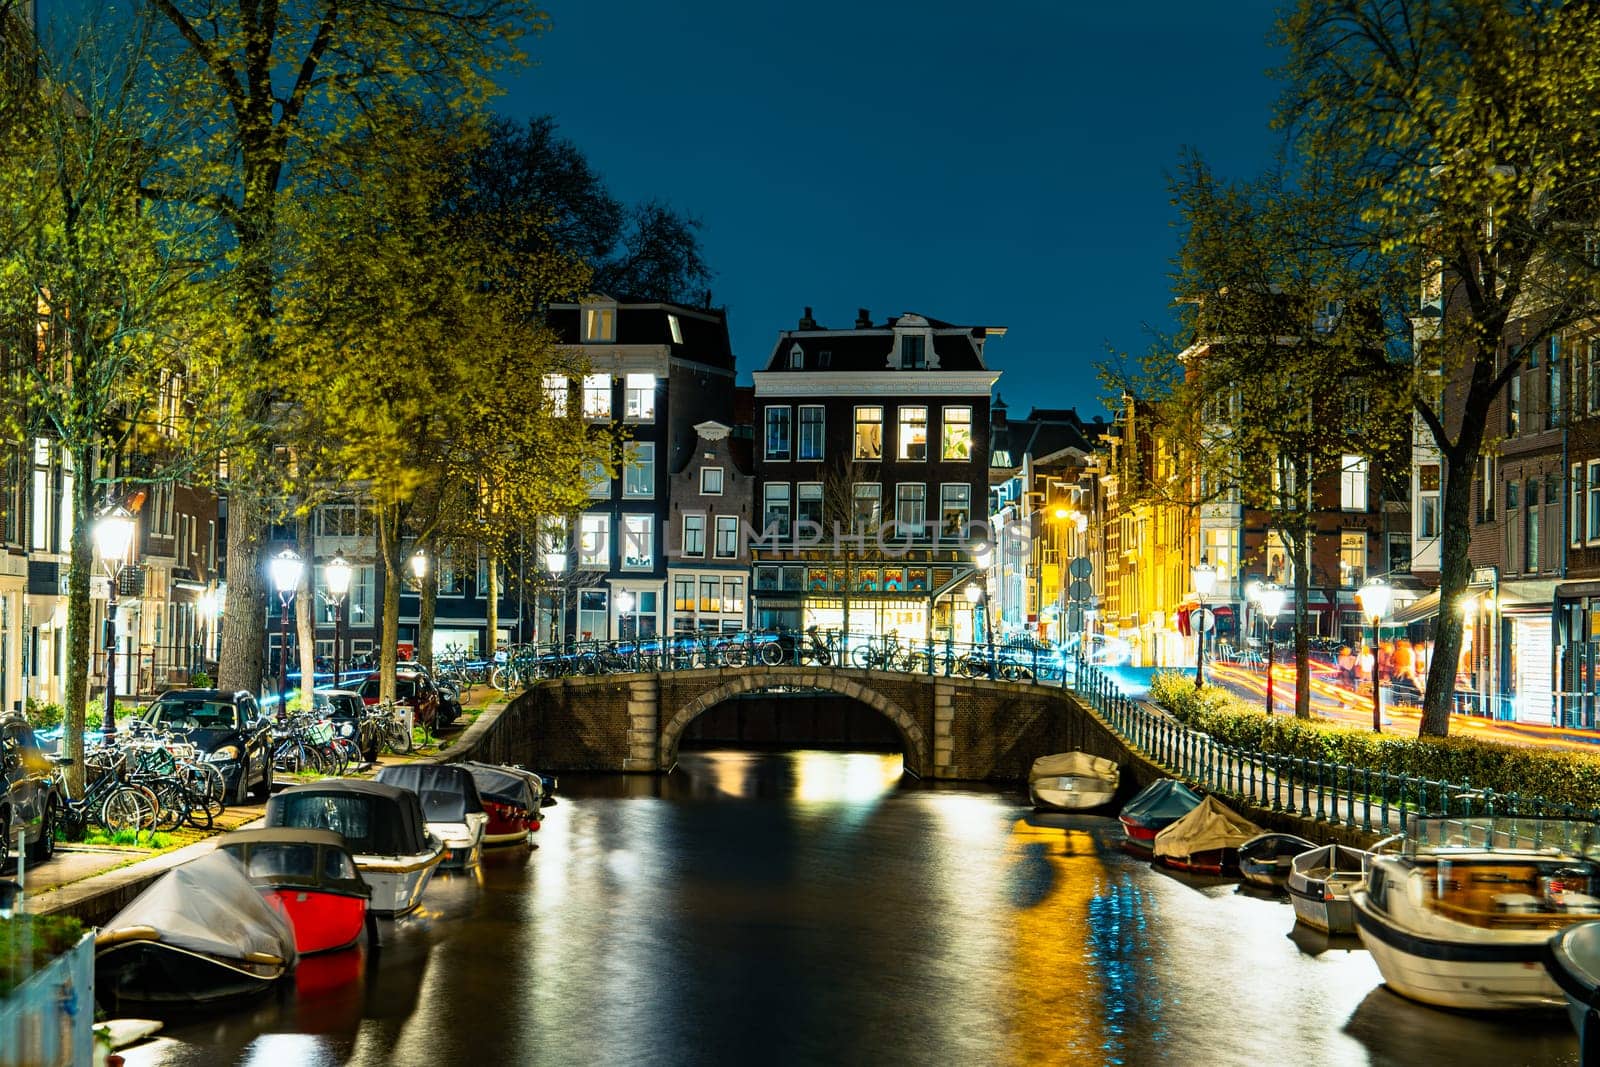 Captivating Night in Amsterdam: A Mesmerizing Long Exposure Photo of Amsterdam's Nighttime Canals.